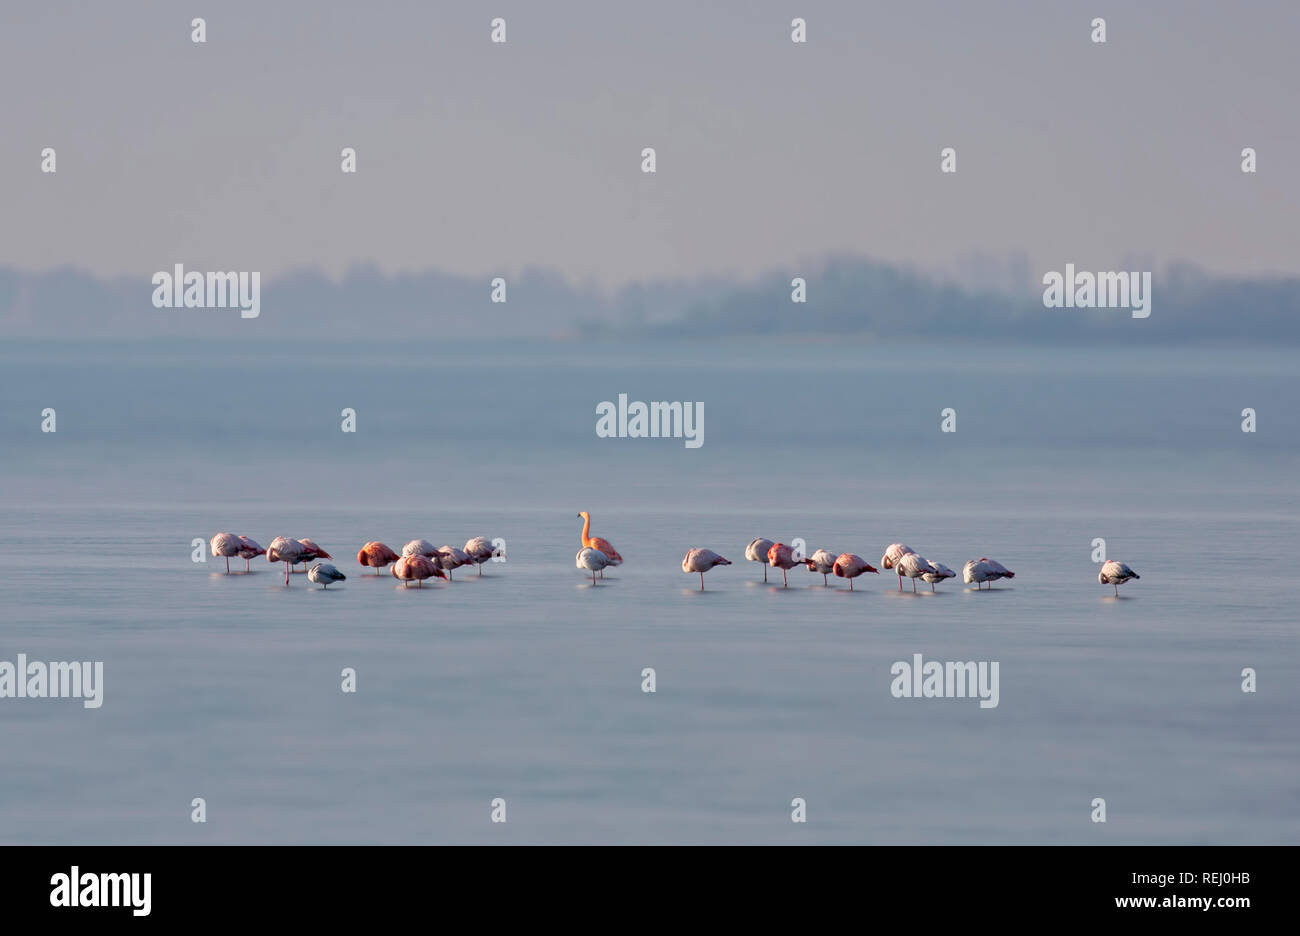 The Netherlands, Battenoord, hamlet on the island Goeree-Overflakkee, lake called Grevelingenmeer. Wintering place for flamingos. Blurred motion. Stock Photo